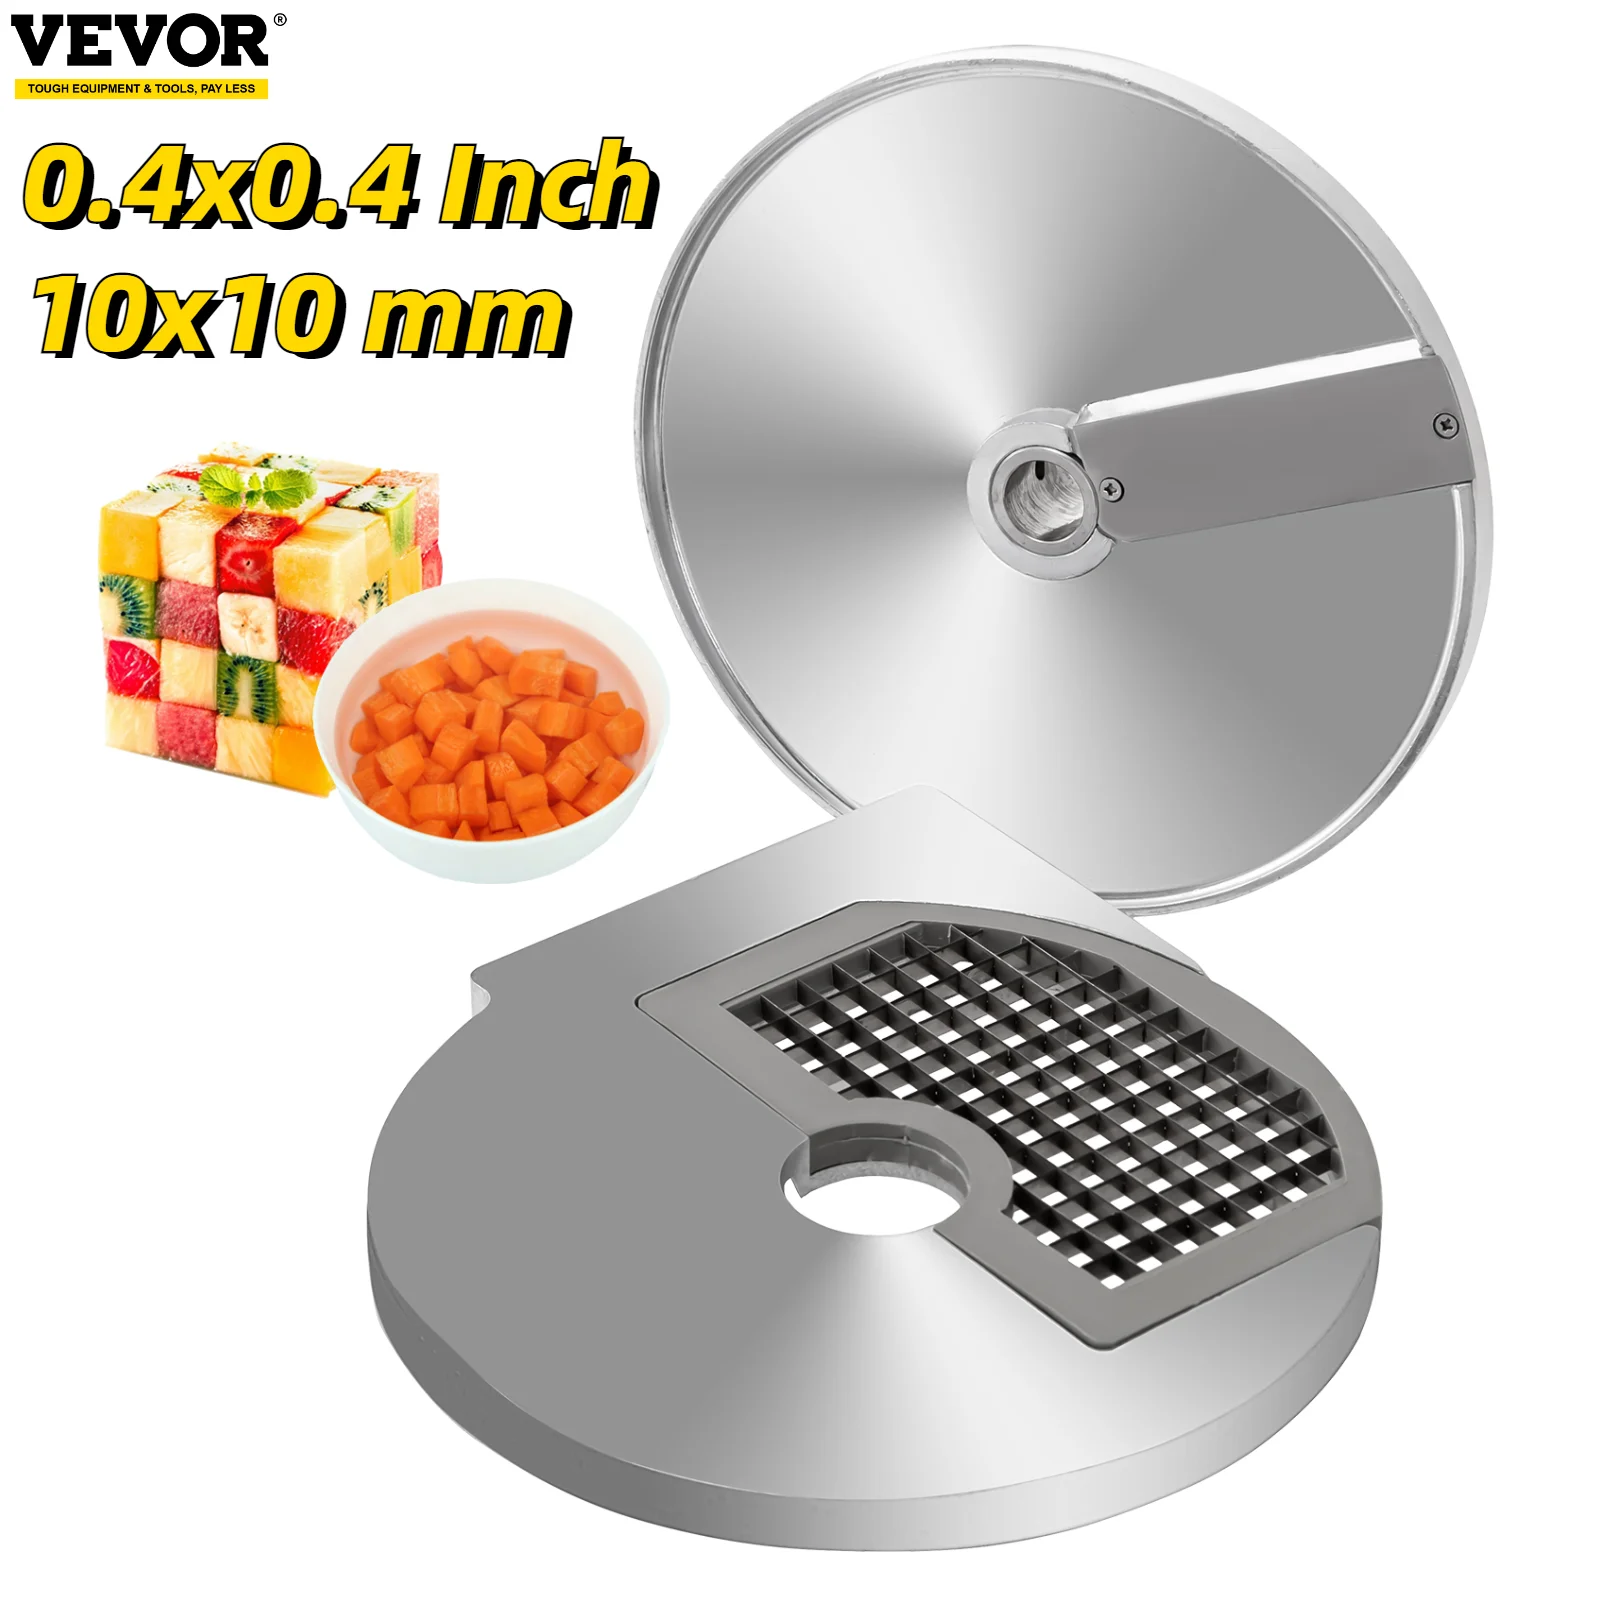 VEVOR Mandoline Dicing Grid Vegetable Cutter Kit Stainless Steel 0.4x0.4 Inch Disc Home Dice Fruit Gadgets Kitchen Accessories